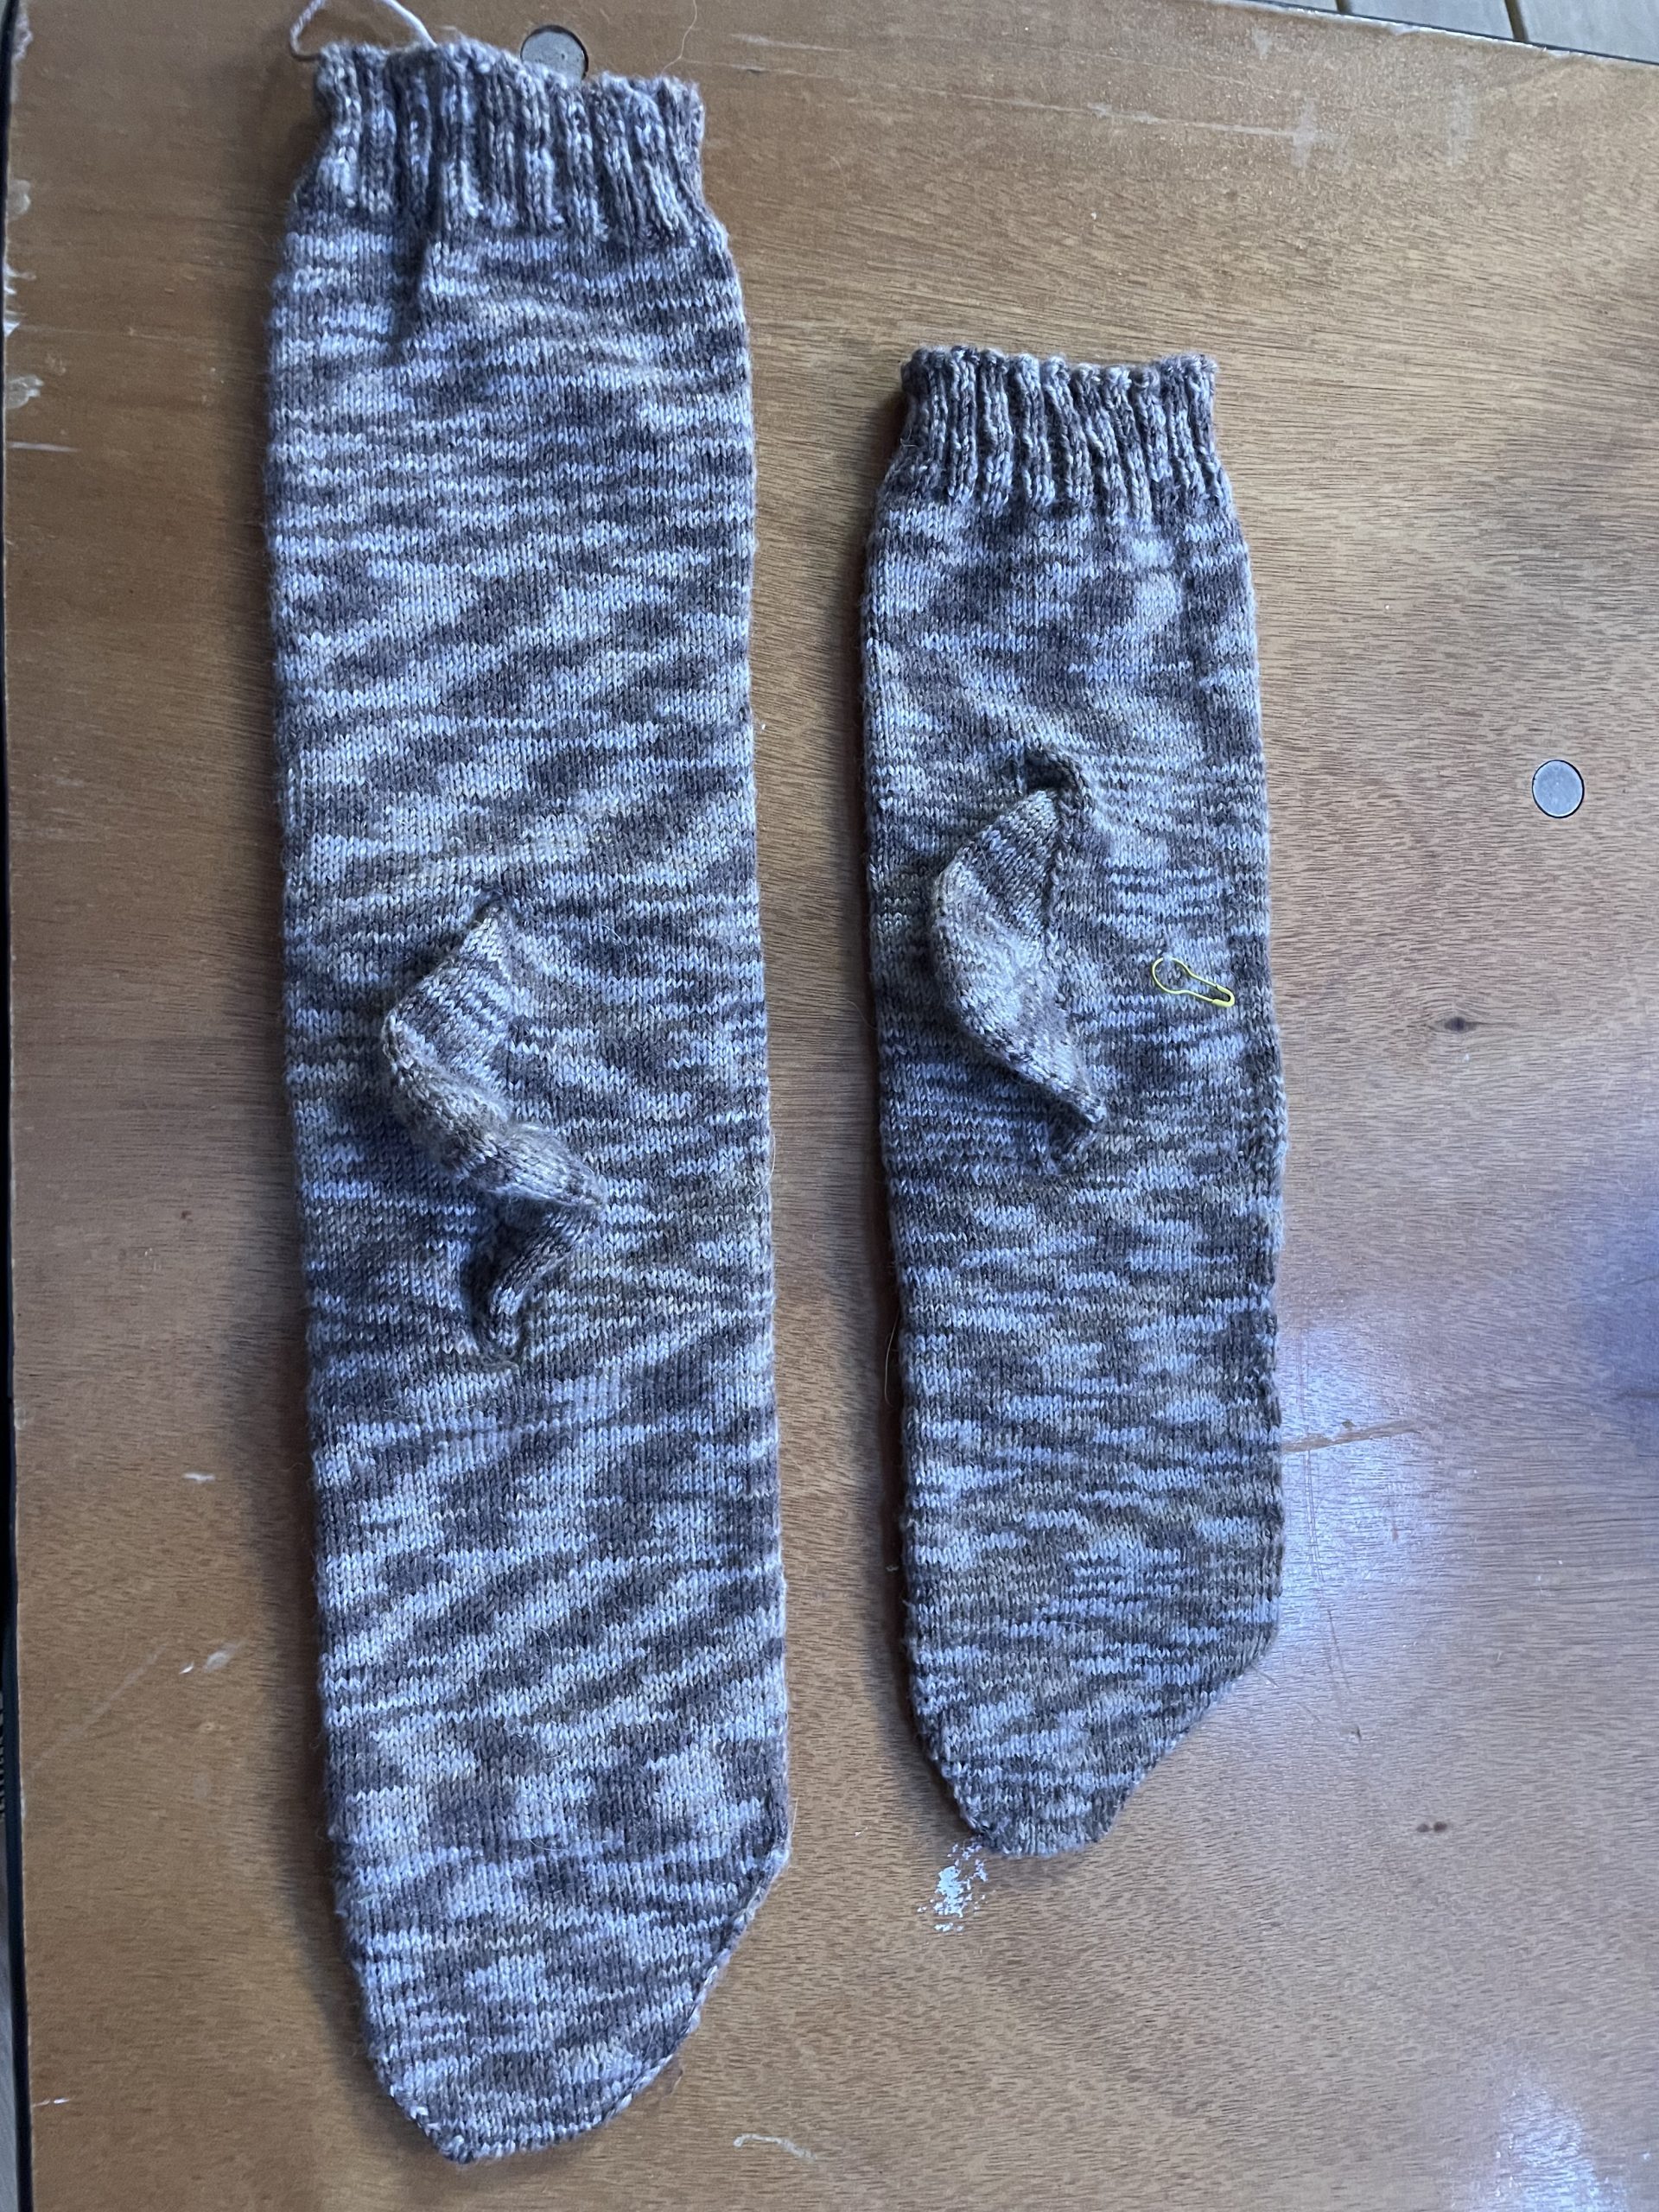 Frankensocks! A gothic tale of sock knitting gone wrong – and right again